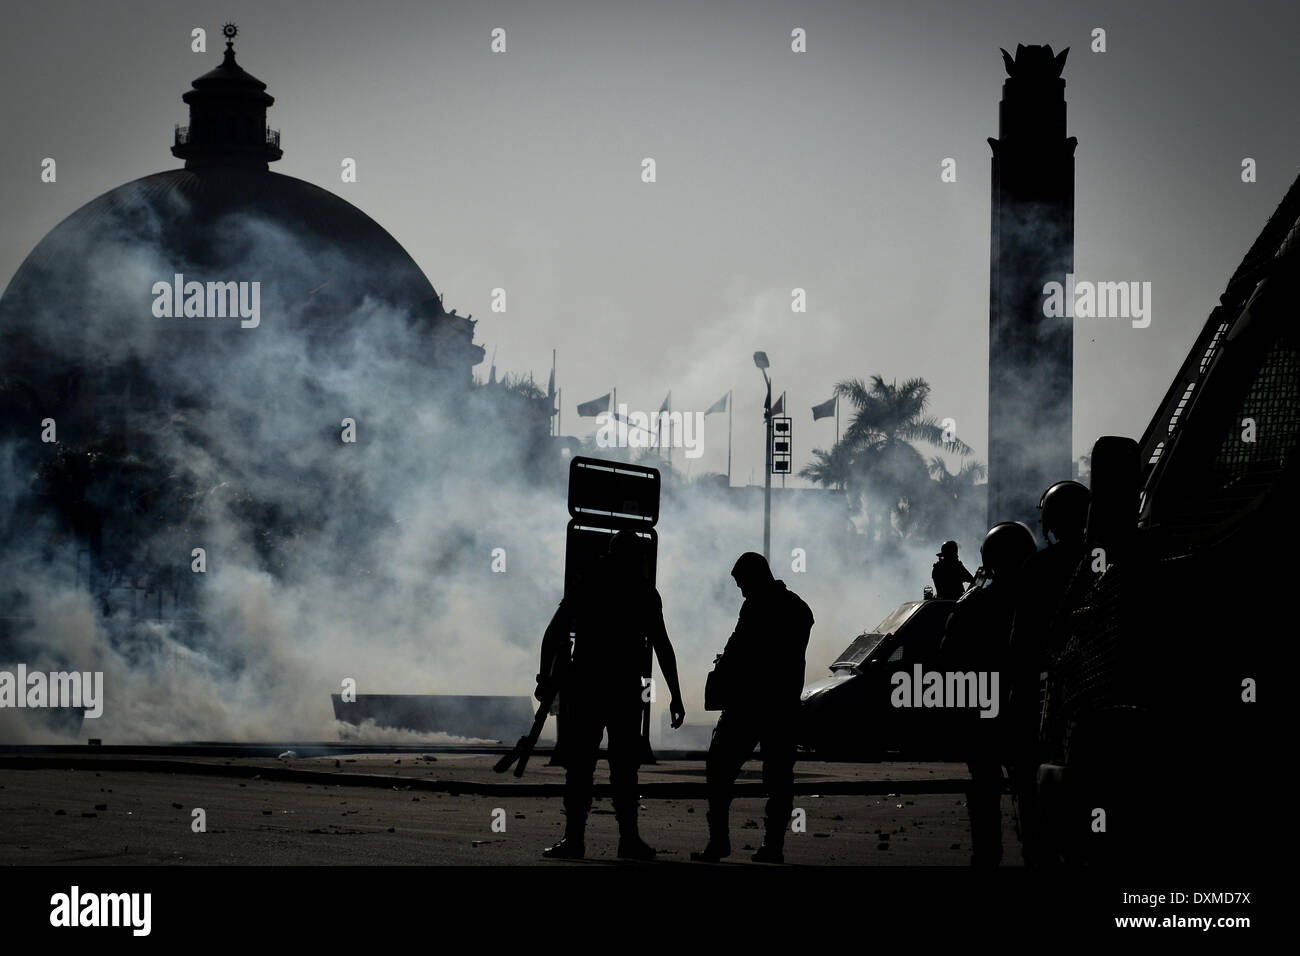 Cairo, Egypt. 26th Mar, 2014. Cairo university students clash with riot police in front of the university. The police fired tear gas and students threw stones and fireworks .a 17 years old boy was shot in his head, Cairo, Egypt, on March 26, 2014. © Mahmoud Shahin/NurPhoto/ZUMAPRESS.com/Alamy Live News Stock Photo